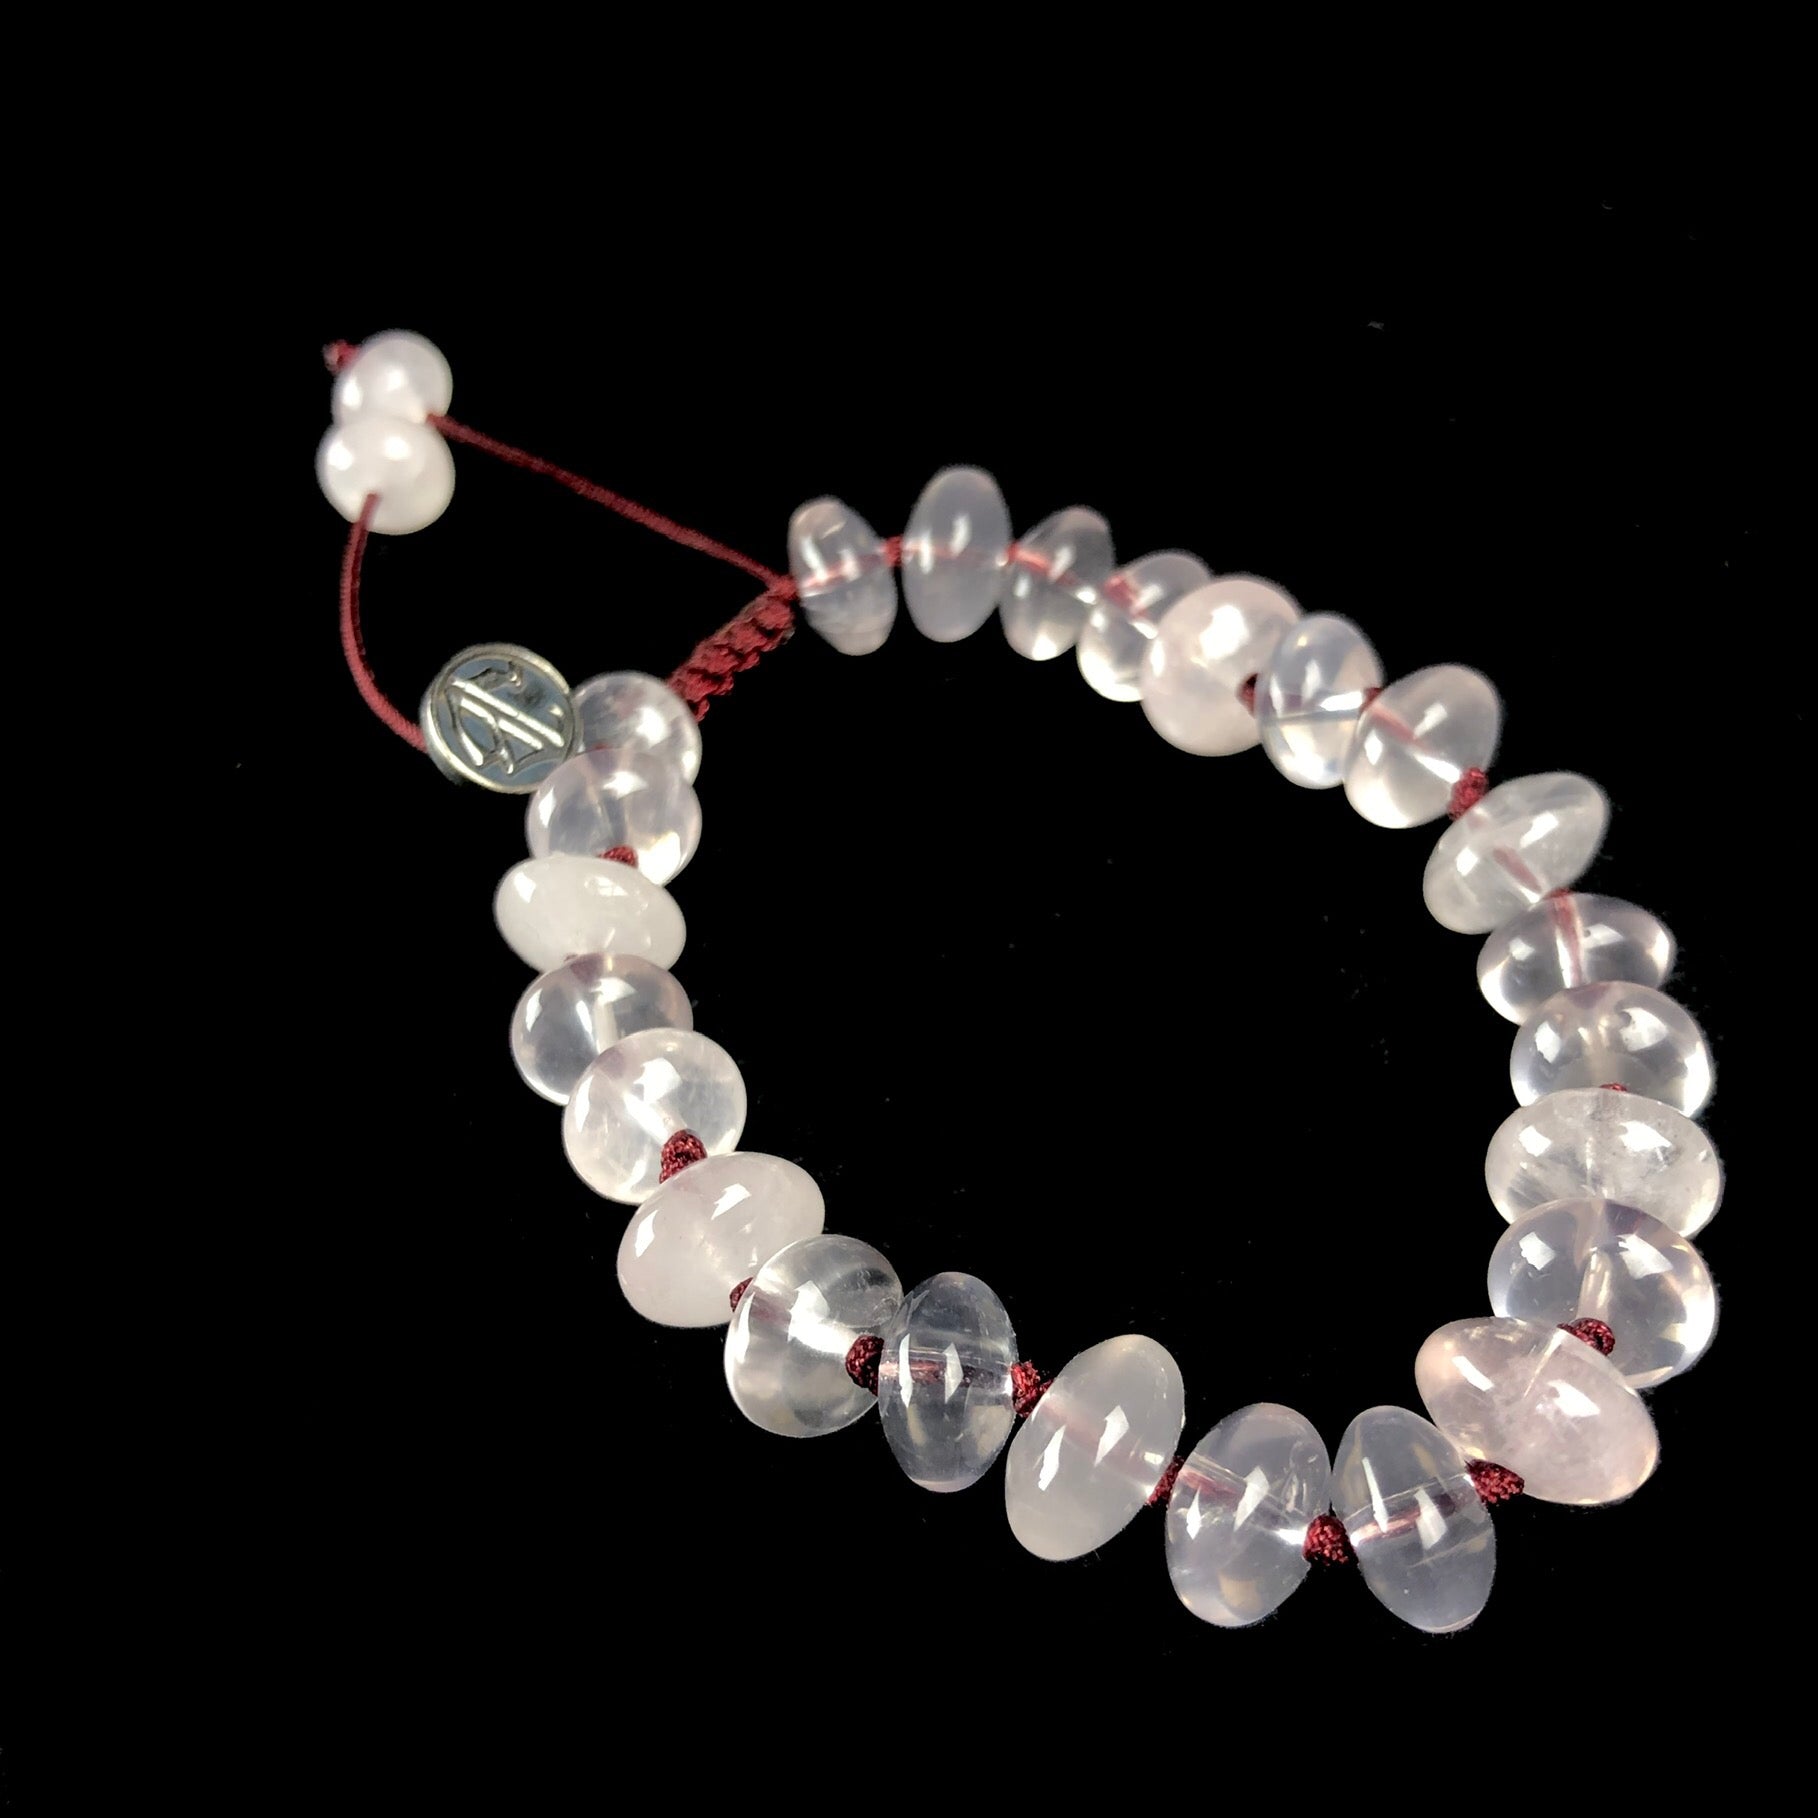 Translucent light pink colored stones bracelet on dark red knotted cord